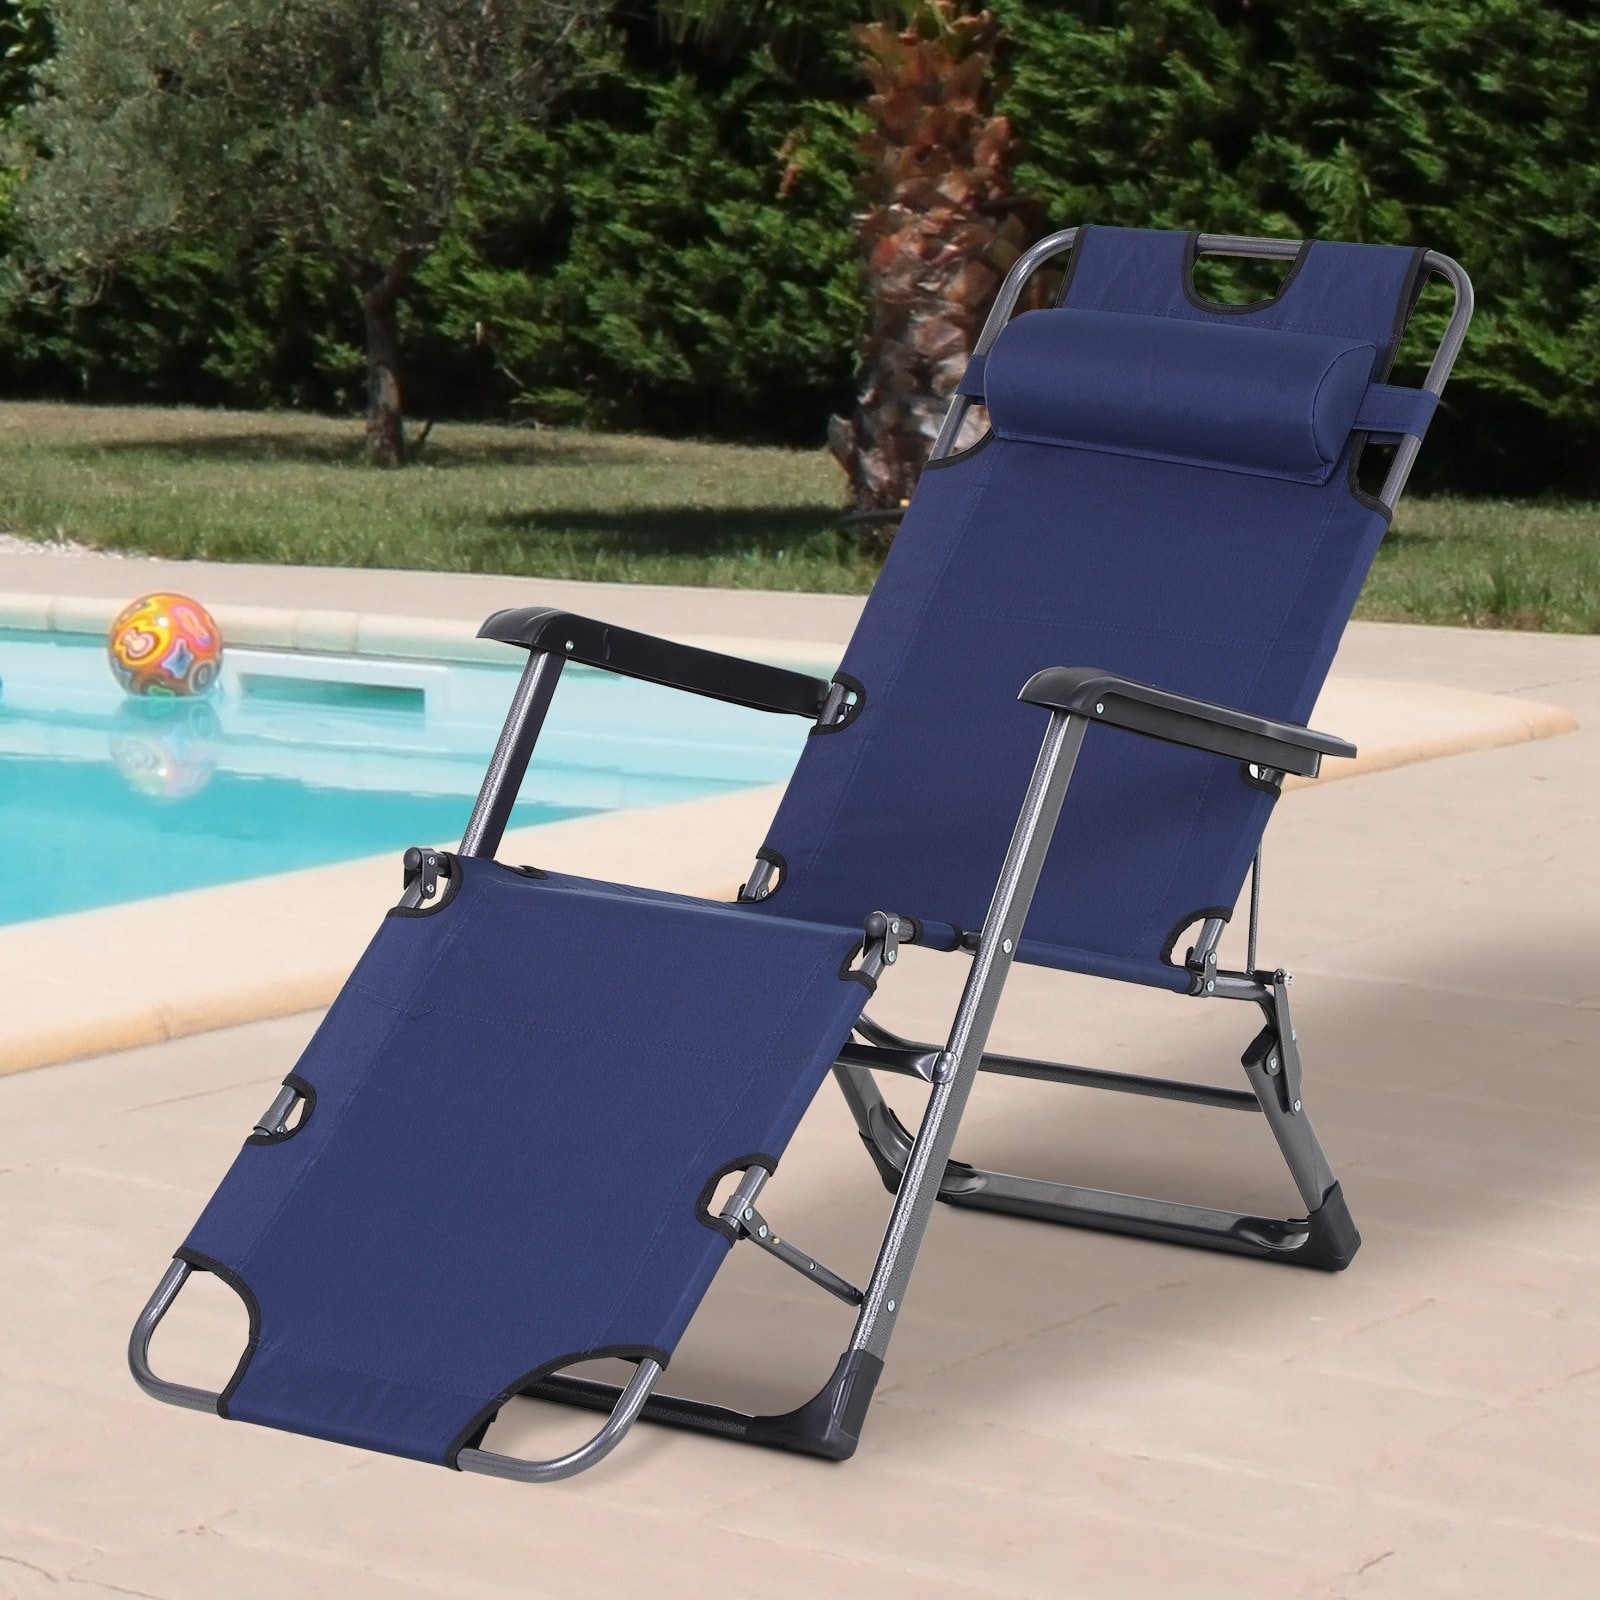 Outsunny 2-in-1 Patio Lounge Chair W/ Pillow  Outdoor Folding Sun Lounger Reclining To 120°/180°  Oxford Fabric